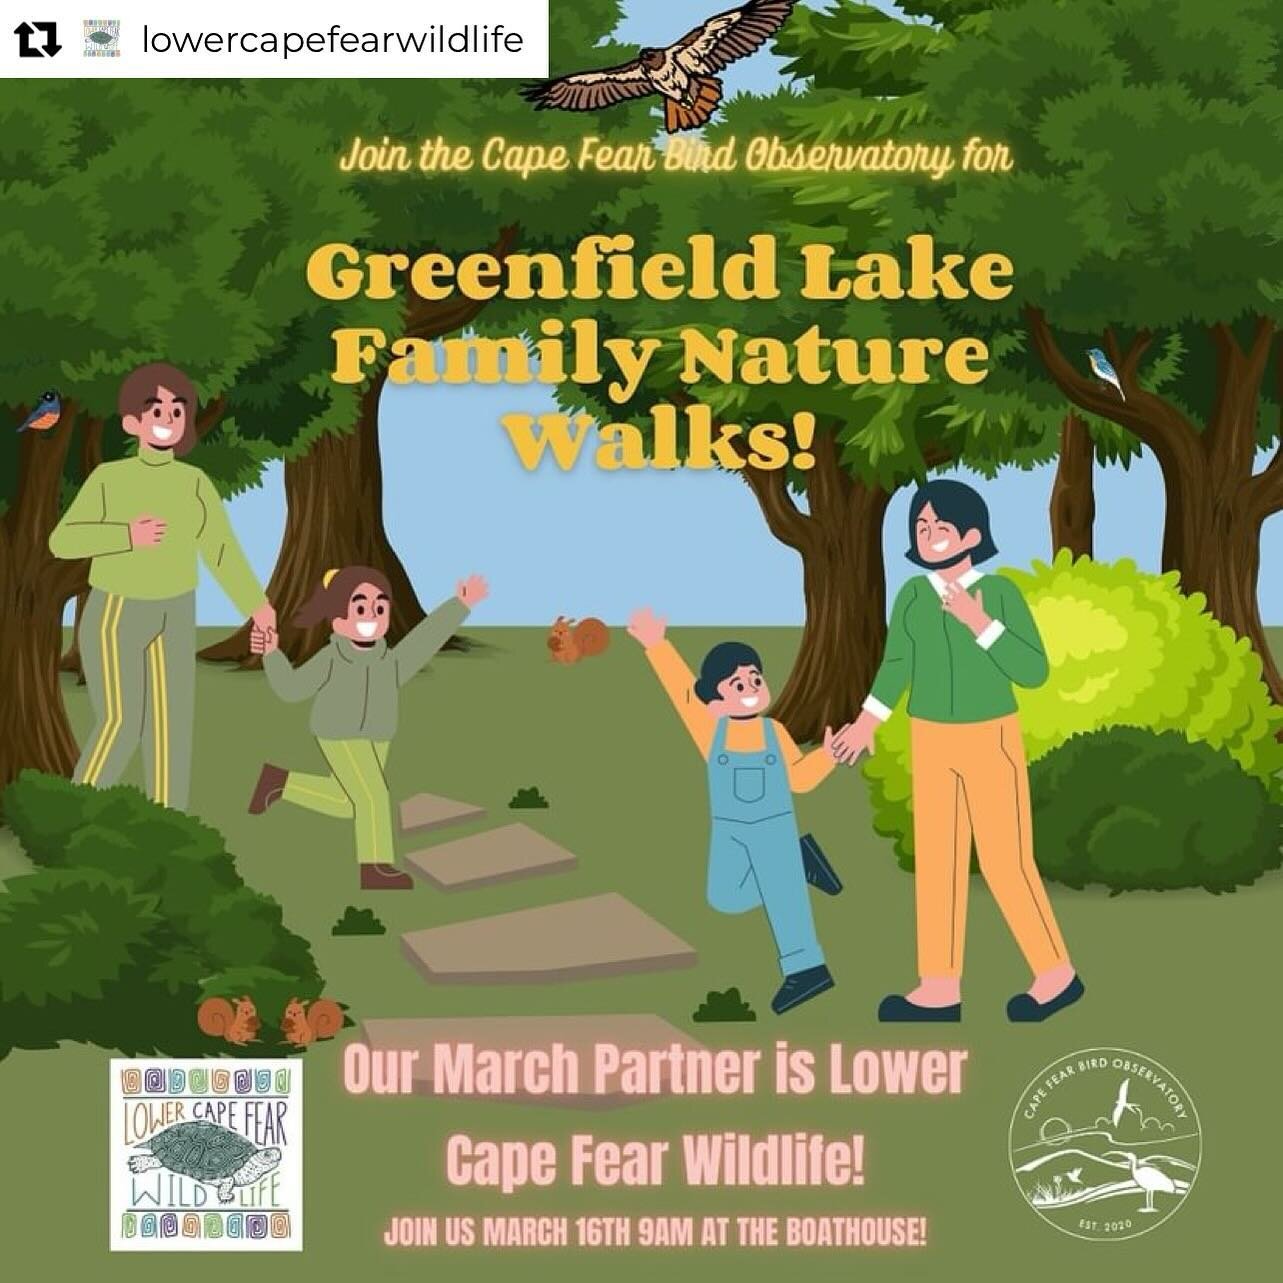 Repost from @lowercapefearwildlife
&bull;
We are so excited about assisting @cape_fear_bird_observatory with their March nature walk! 

Bring your friends and family and come spend the morning with us exploring nature, enjoying the outdoors, and meet